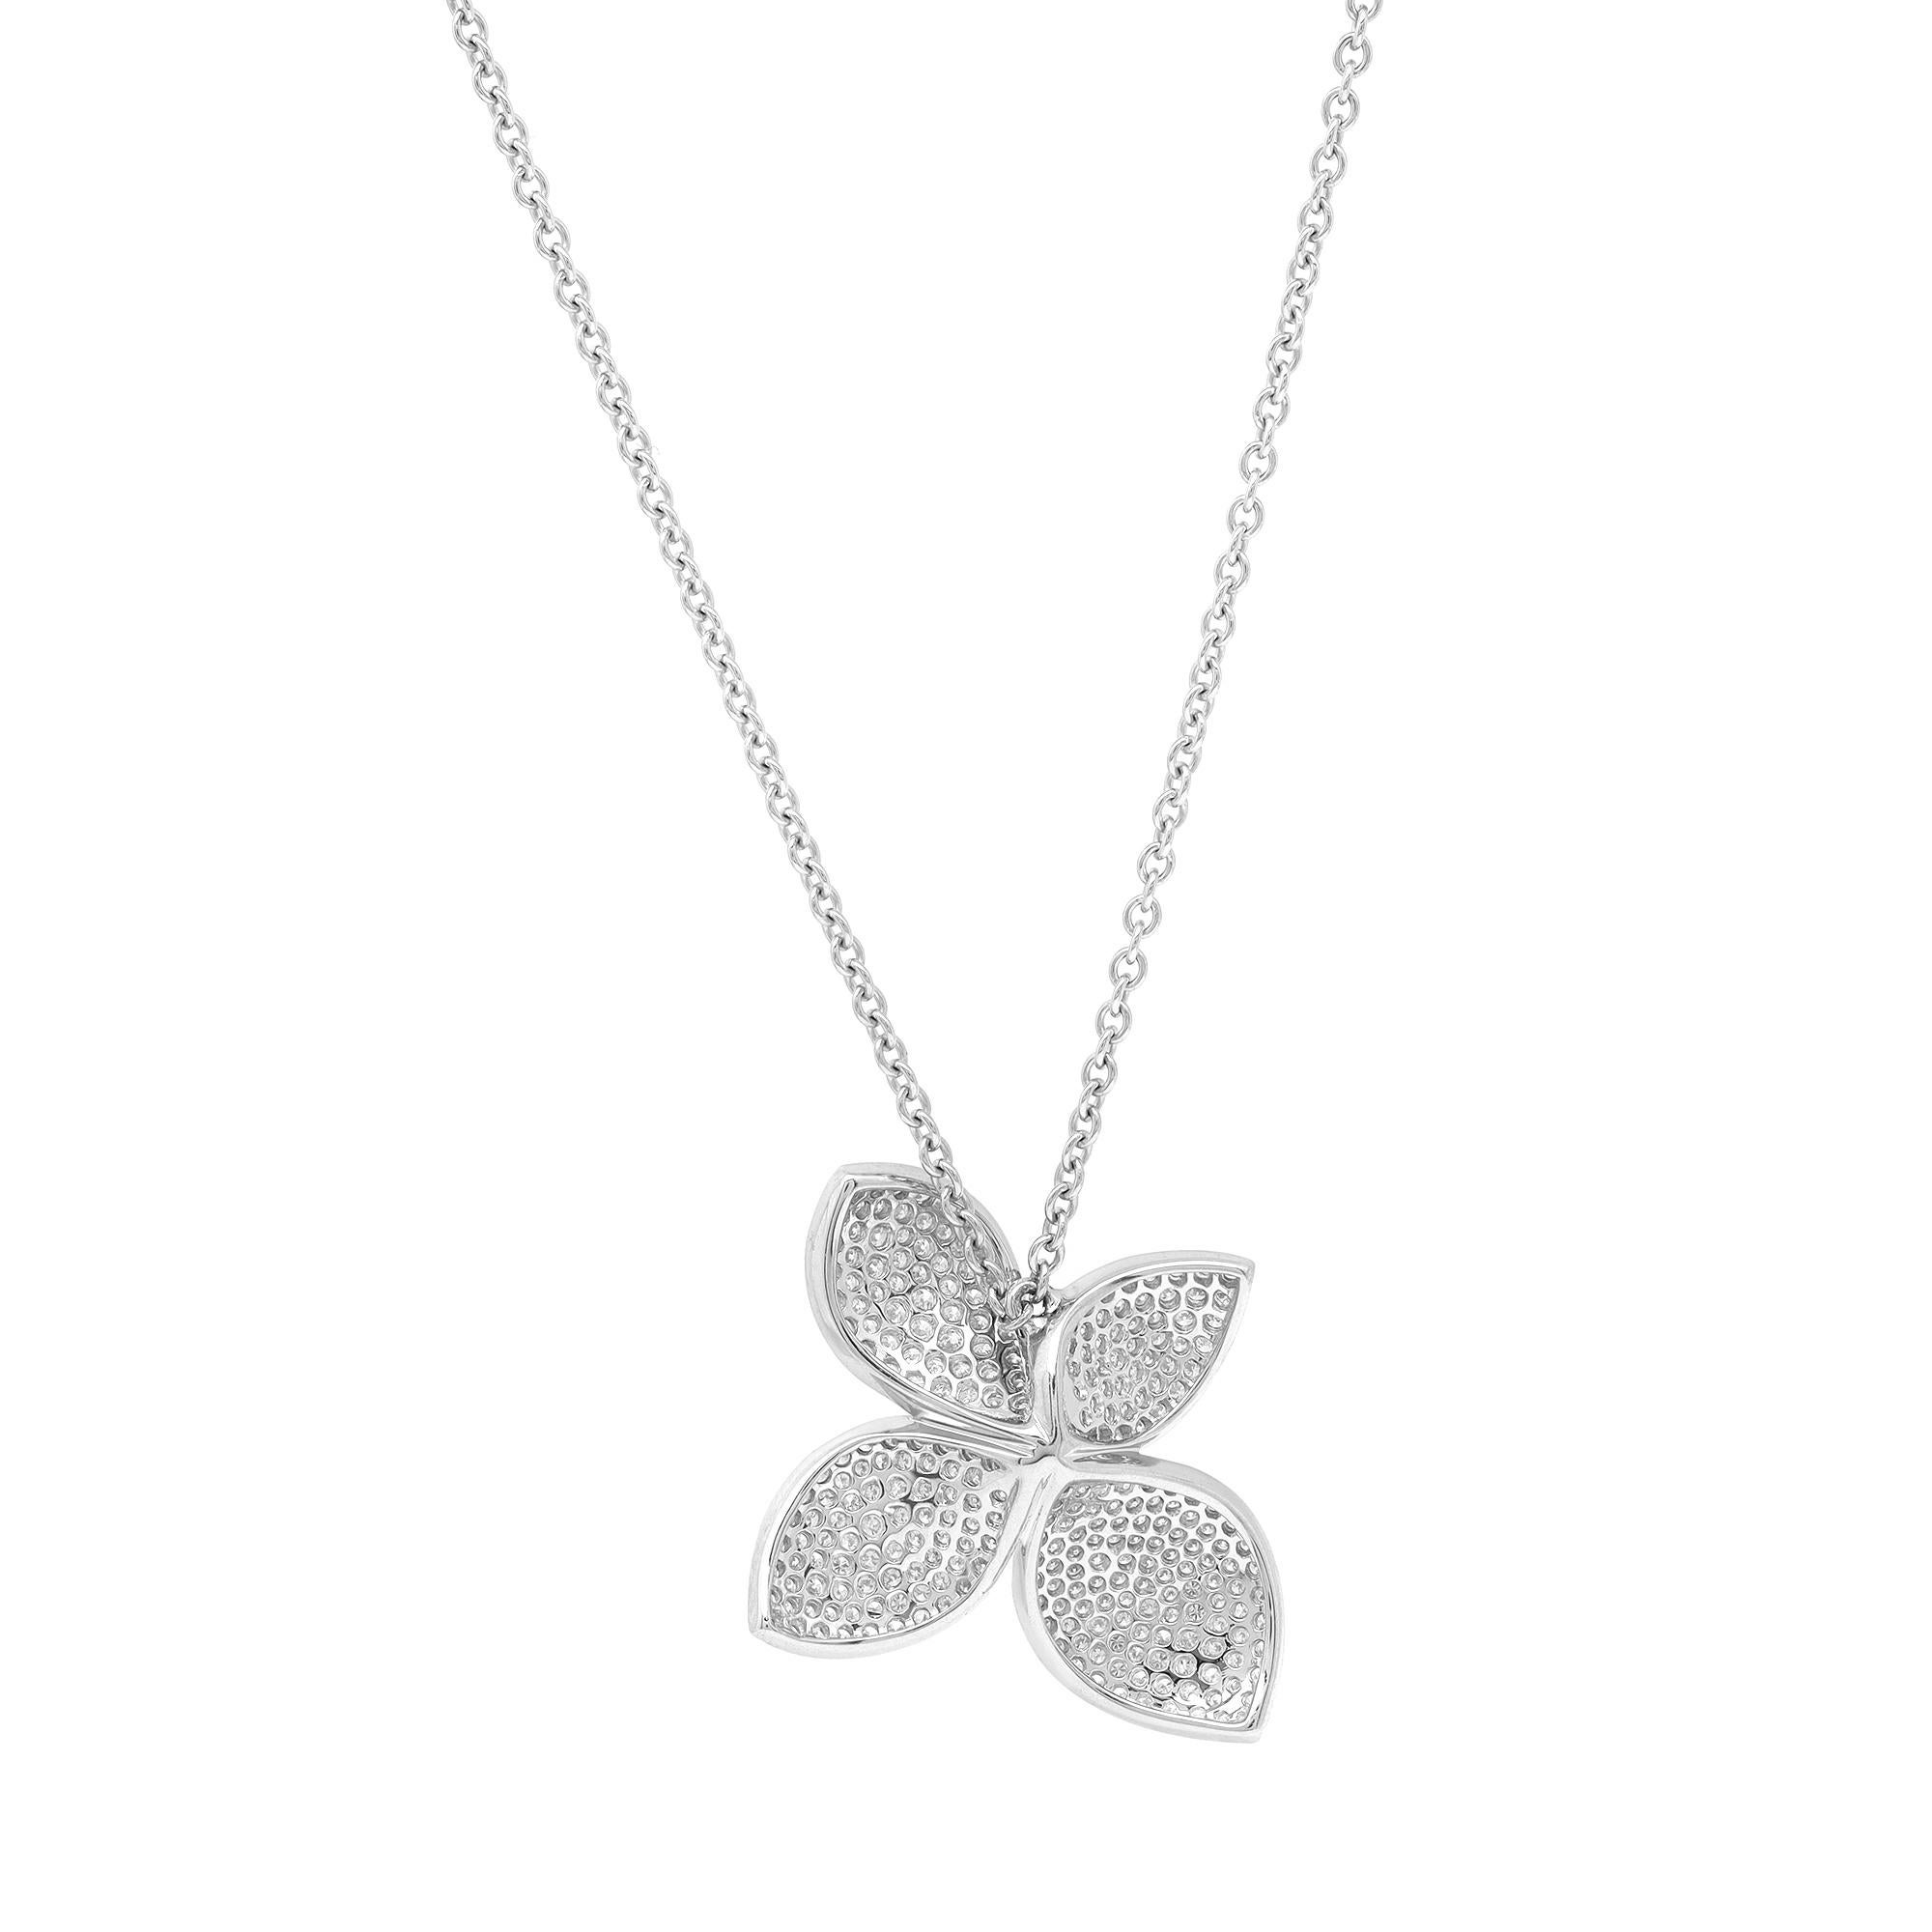 Fall in love with this beautiful flower pendant showcasing dazzling round cut diamonds. This pendant is a perfect gift for any occasion. It features a flower shaped pendant pave set with round brilliant cut diamonds weighing 1.01 carats. Necklace